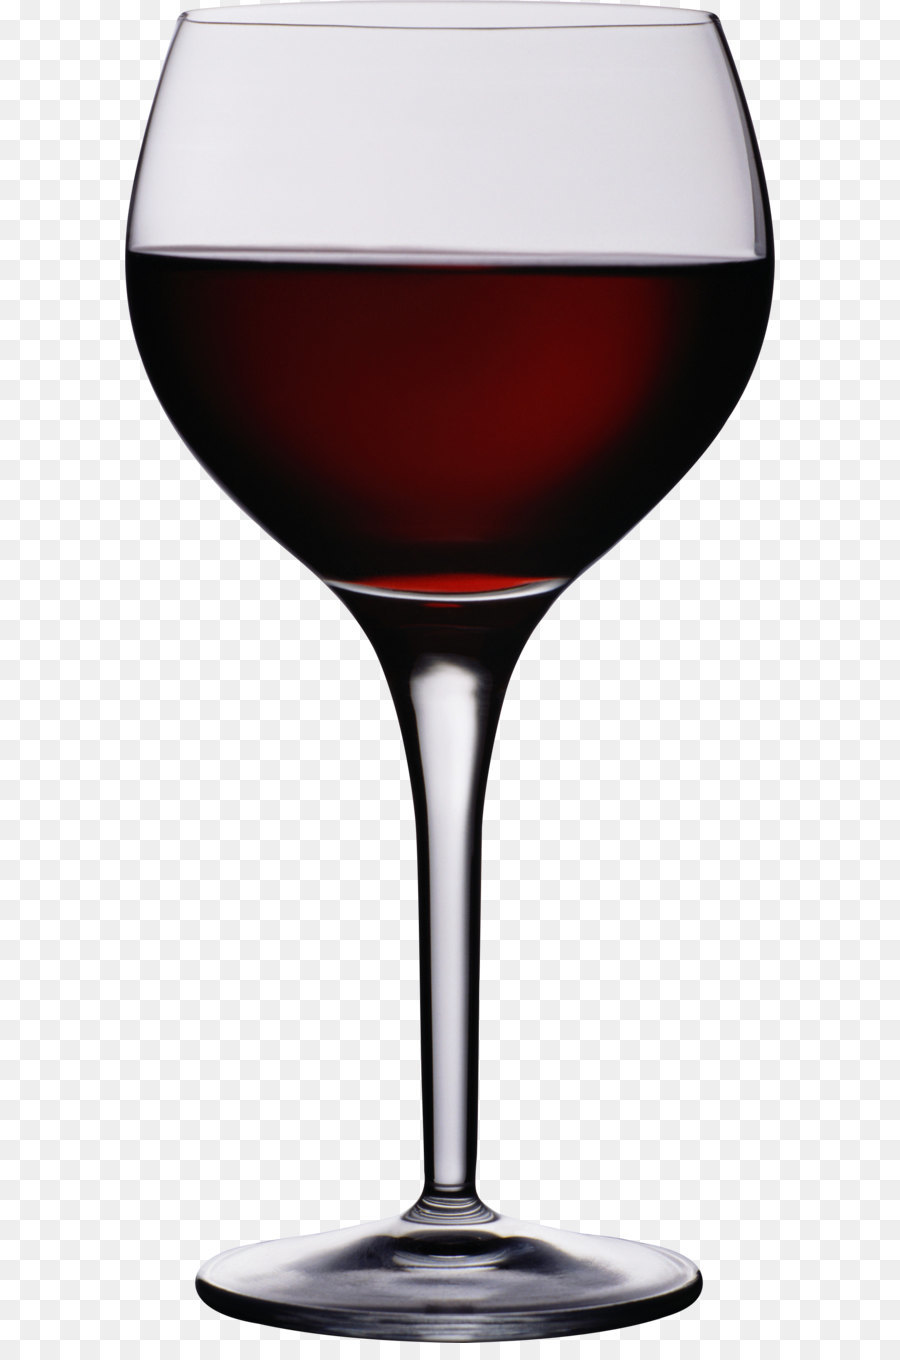 Red Wine White wine Merlot Cabernet Sauvignon - Glass PNG image png download - 1588*3280 - Free Transparent Red Wine png Download.